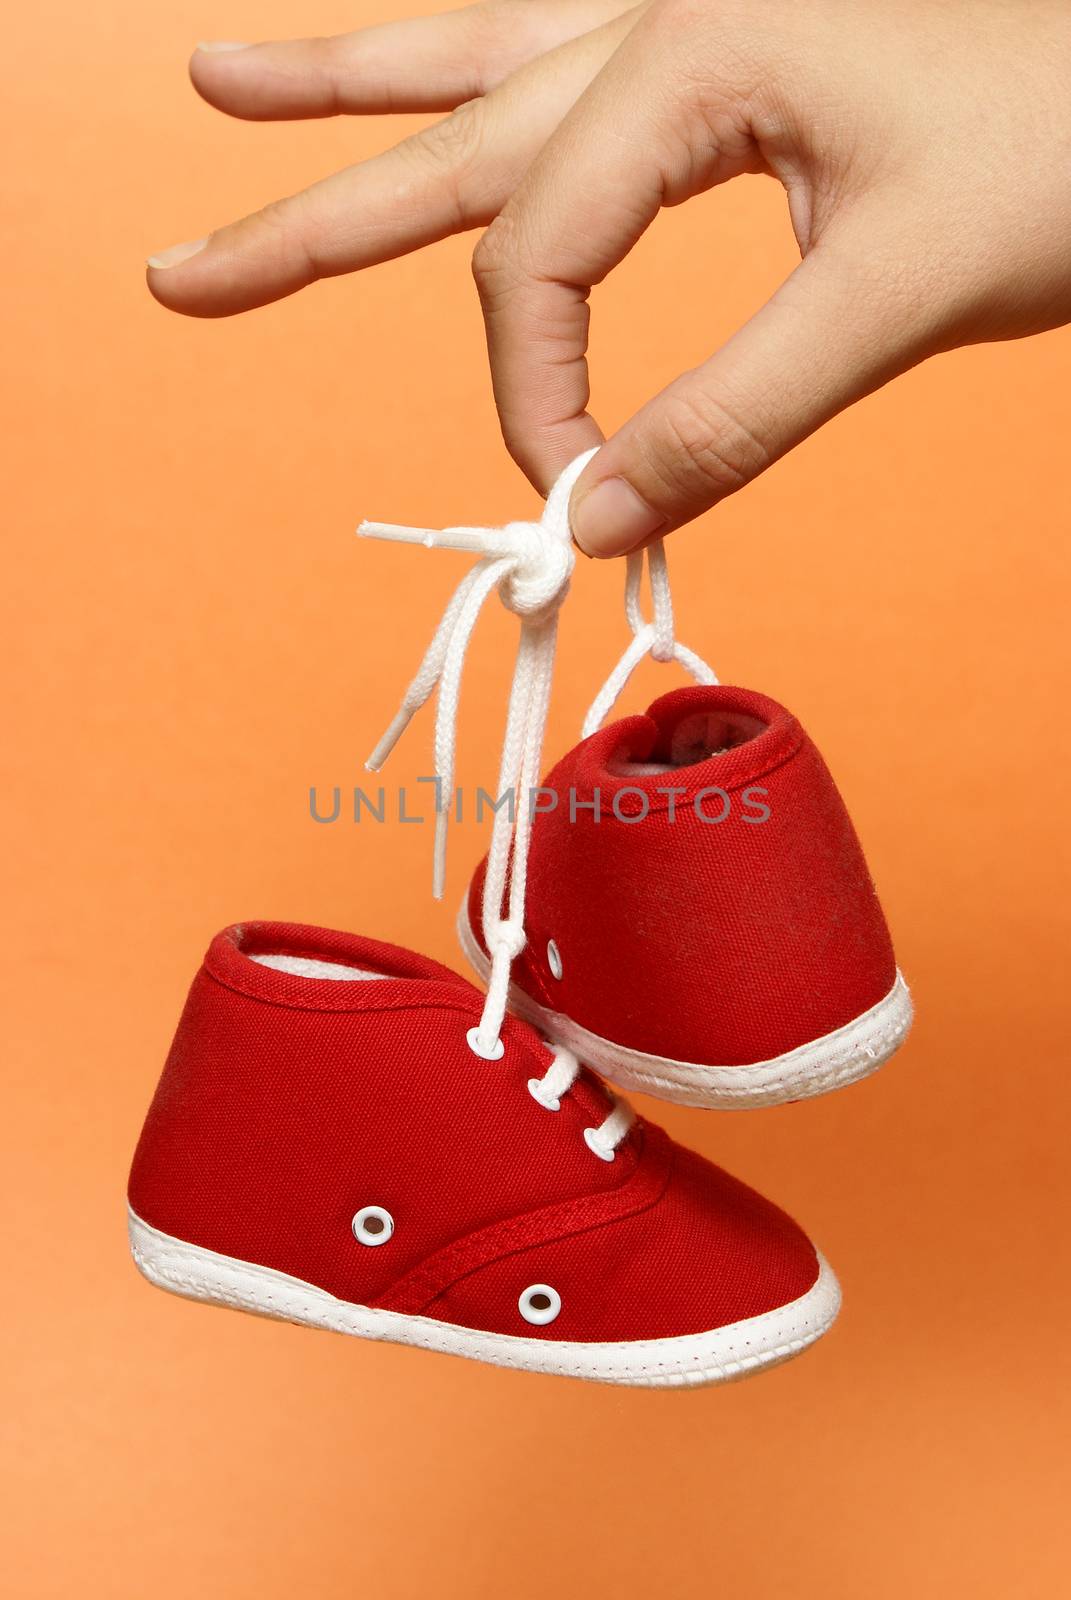 Holding Baby Shoes by AlphaBaby